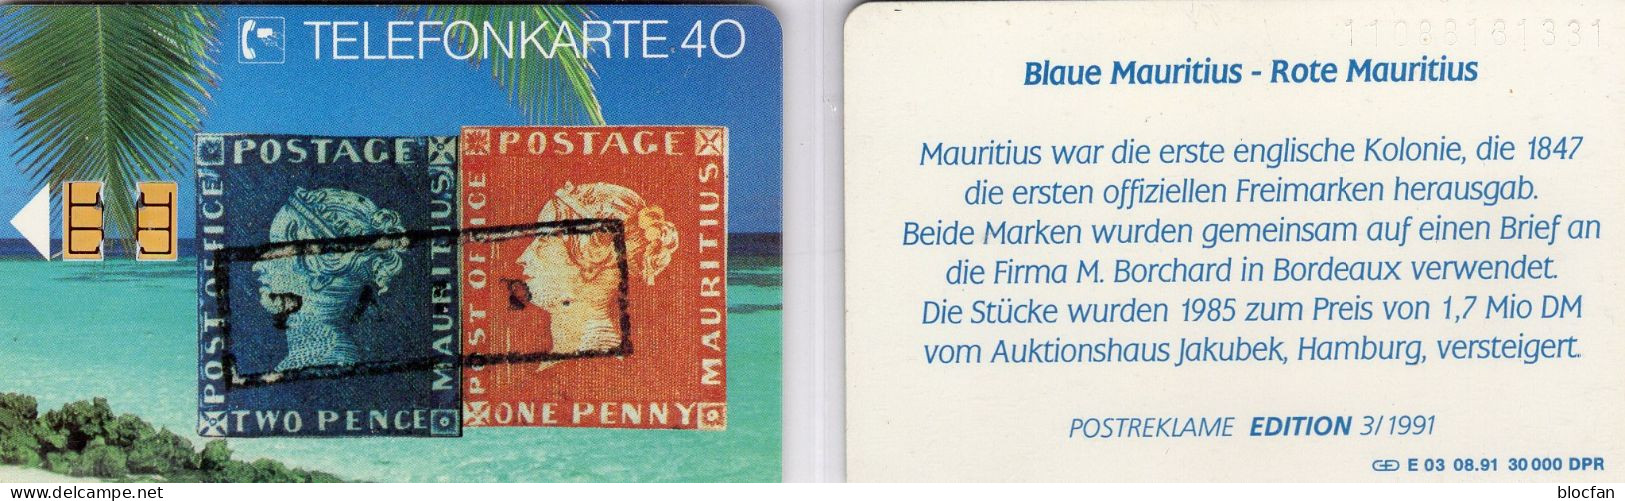 Blaue/rote Mauritius TK E03/1991 30.000Expl. ** 25€ Edition1 Kolonie Der UK/GB TC History Stamps On Phonecard Of Germany - E-Series : D. Postreklame Edition